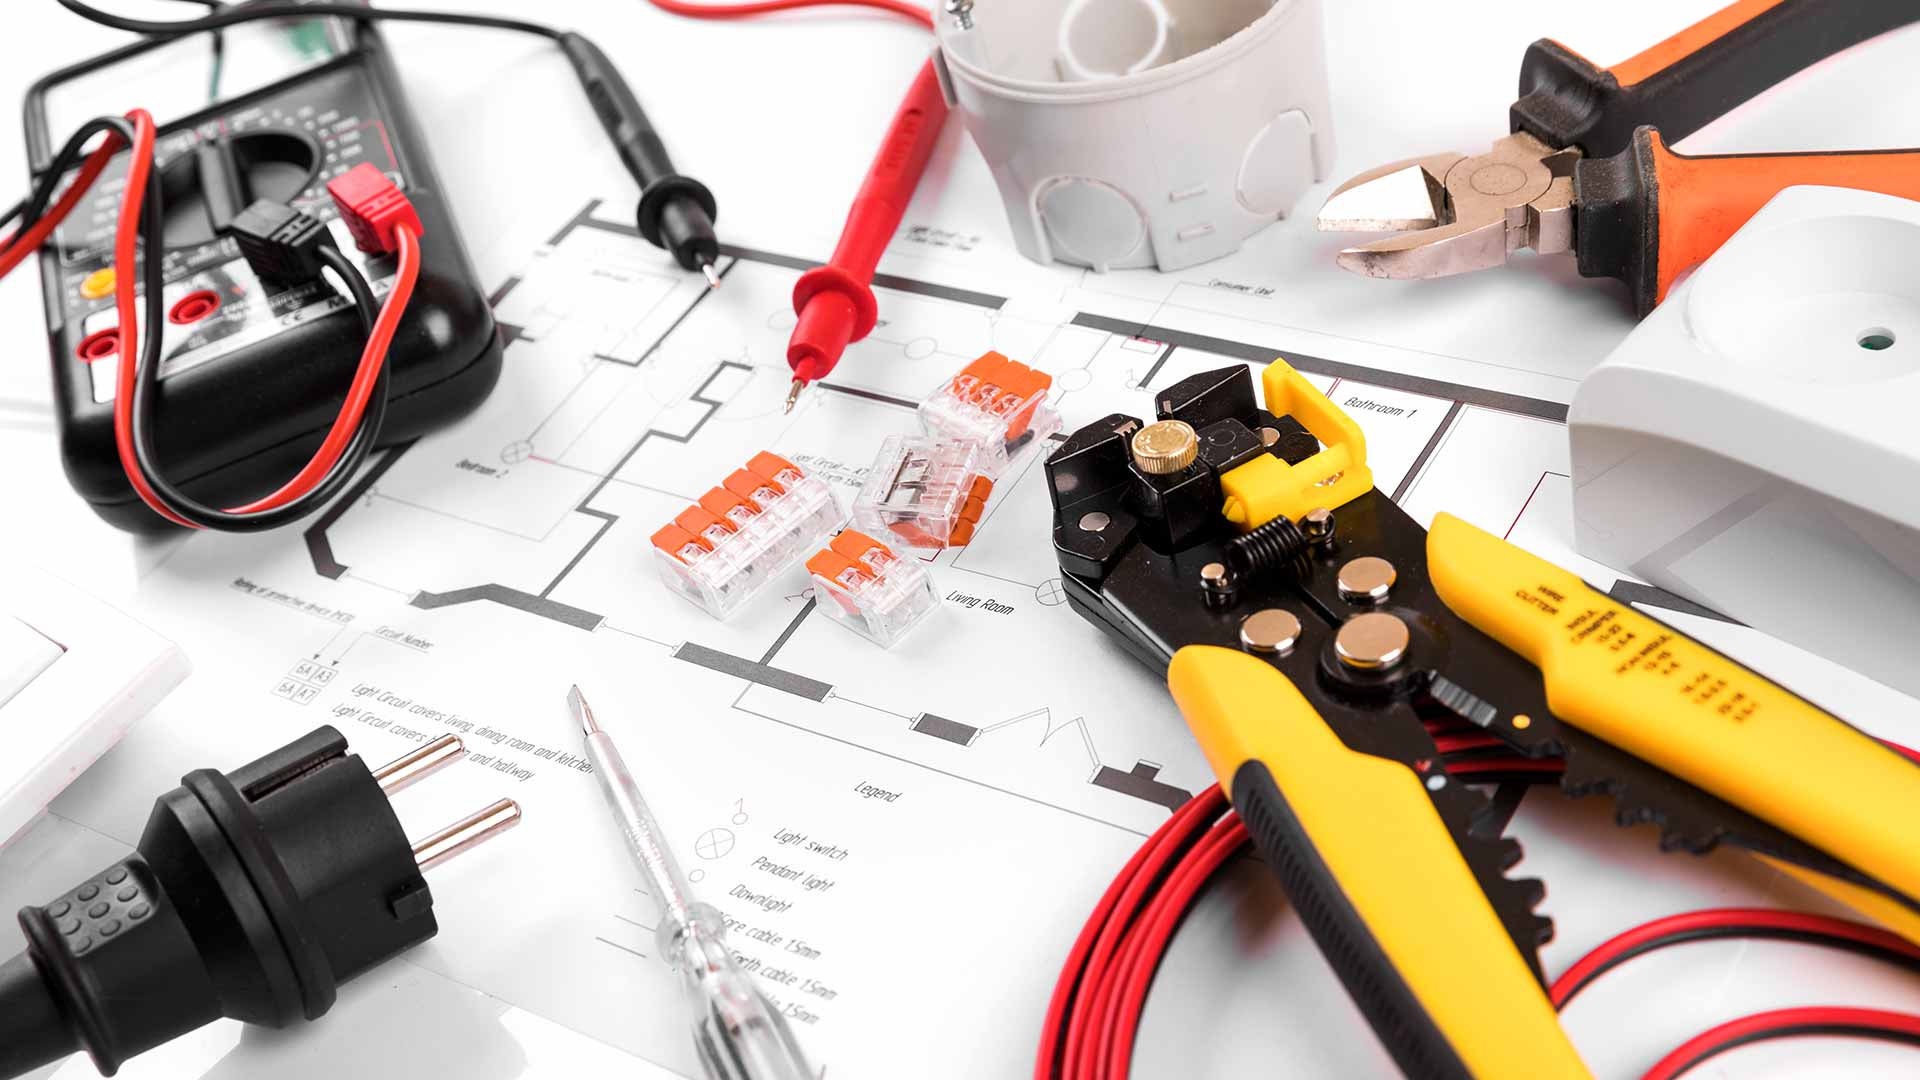 electricians tools and equipment sitting on building plans